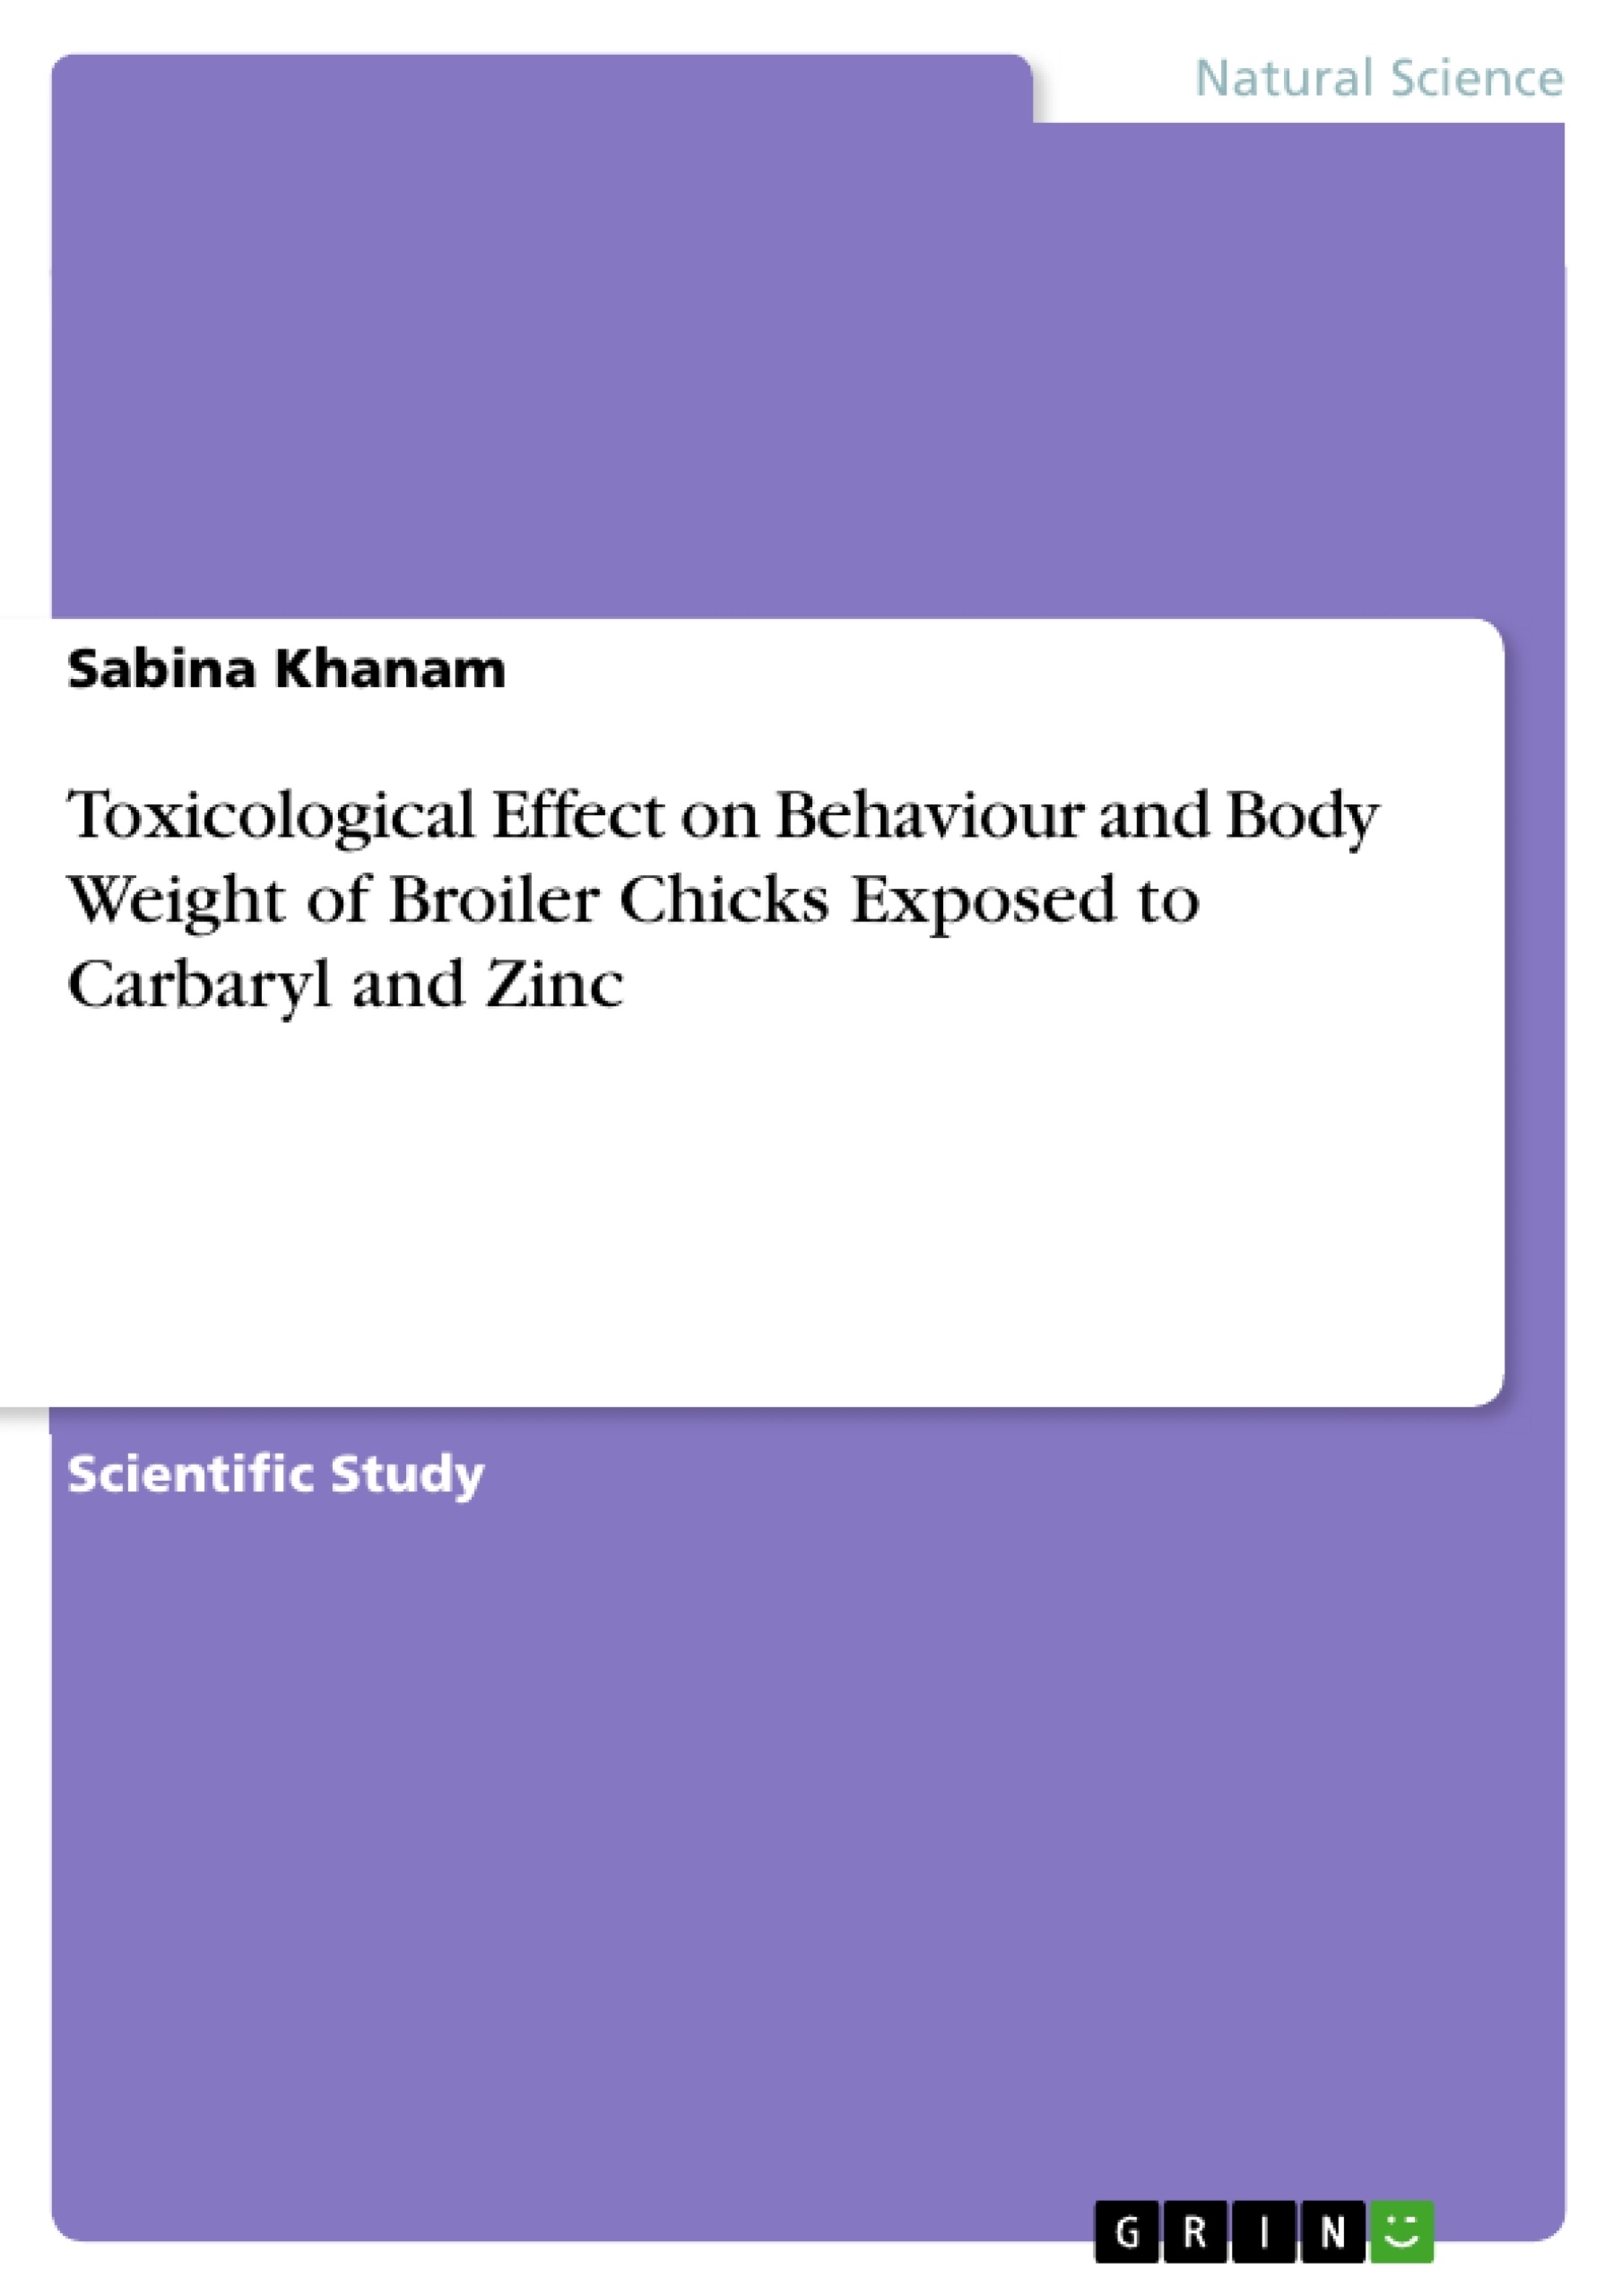 Título: Toxicological Effect on Behaviour and Body Weight of Broiler Chicks Exposed to Carbaryl and Zinc